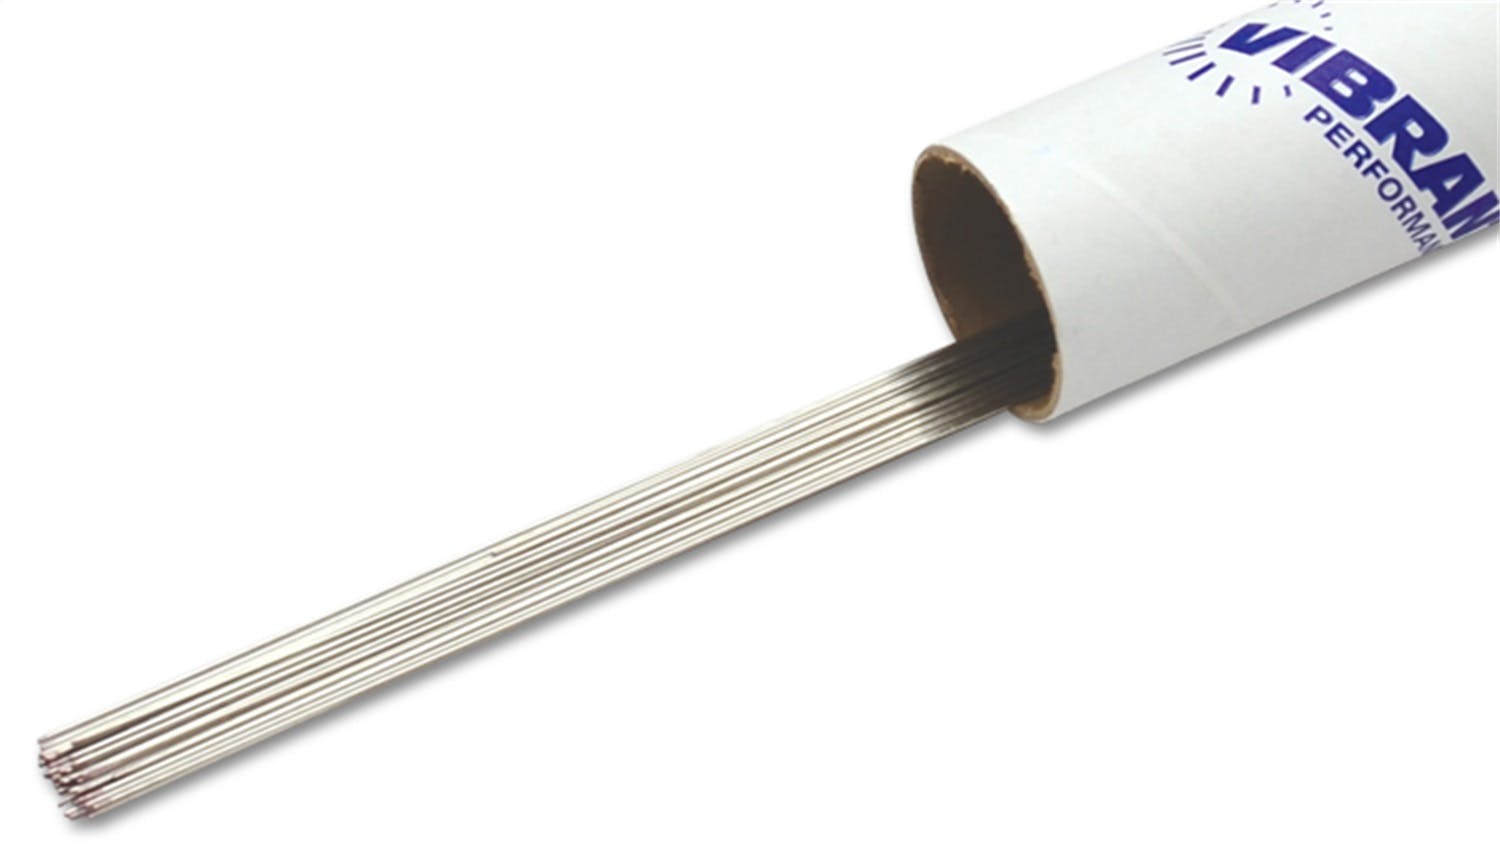 Vibrant Performance 29161 Wire Stainless Steel ER308L - 0.062 inch Thick (1.6mm) - 39.5 inch Long Rod - 1lb box